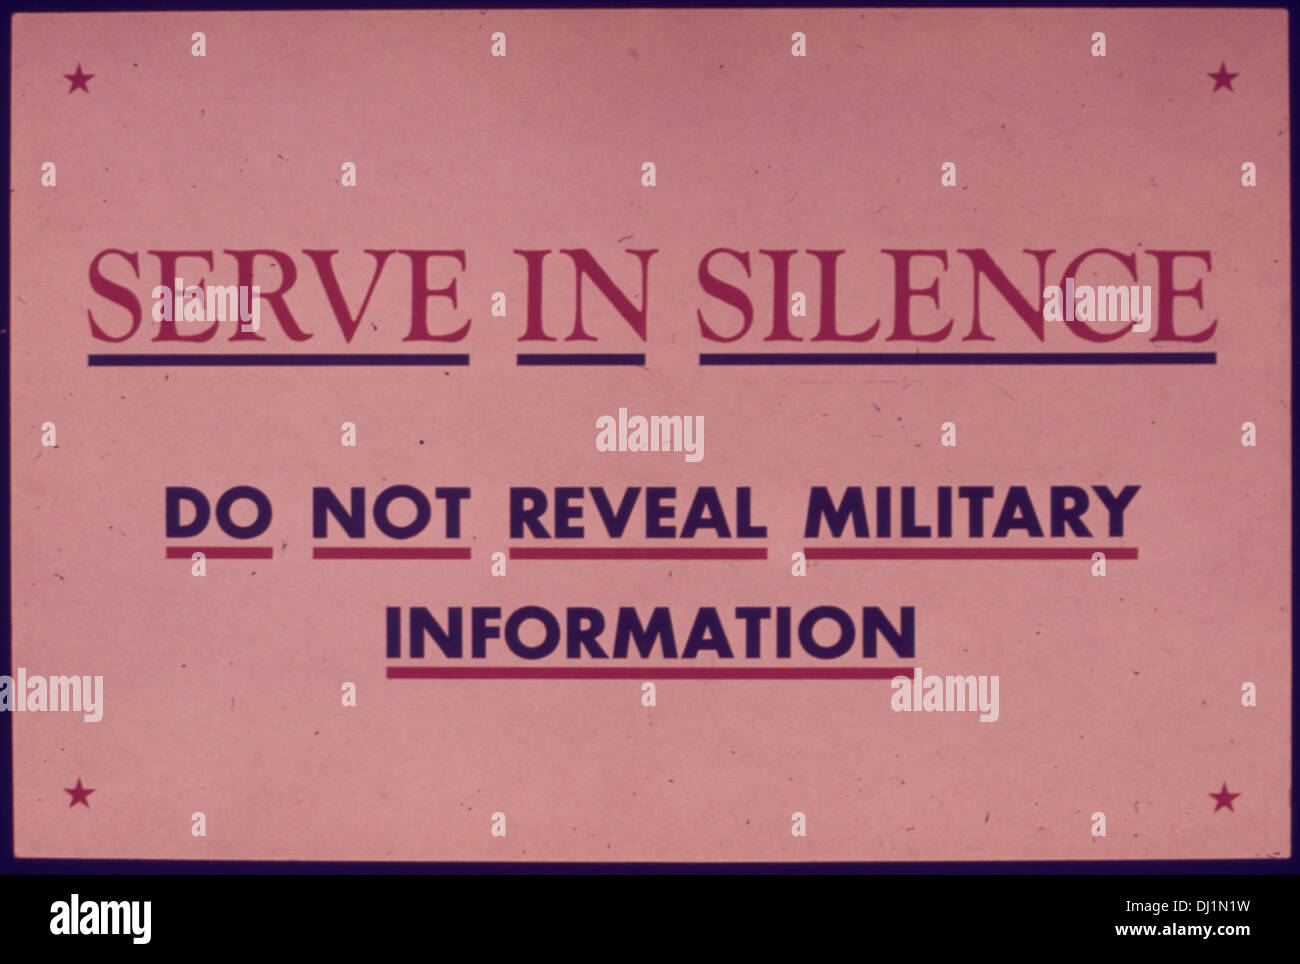 SERVE IN SILENCE - DO NOT REVEAL MILITARY INFORMATION 374 Stock Photo